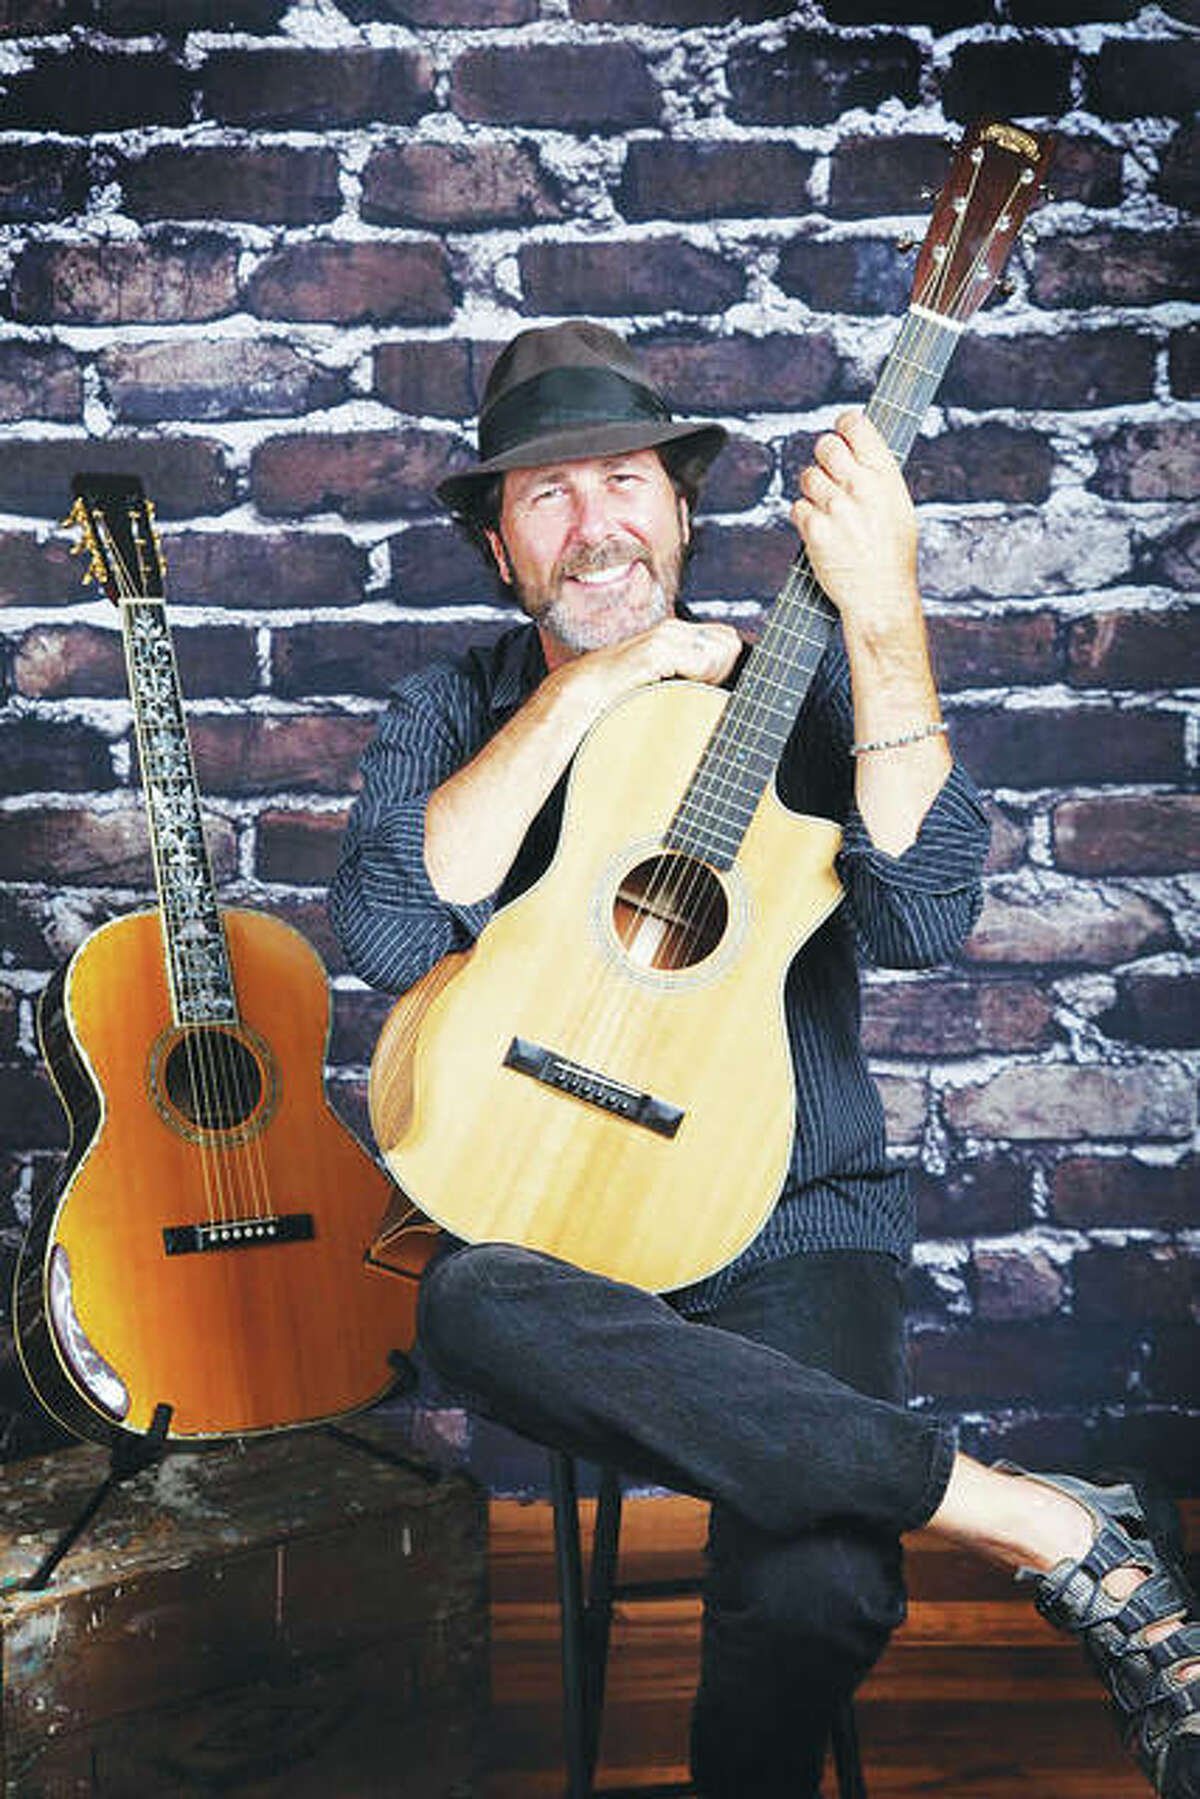 Barry Cloyd will perform on Saturday, May 19, in the new gazebo behind Green Tree Inn.